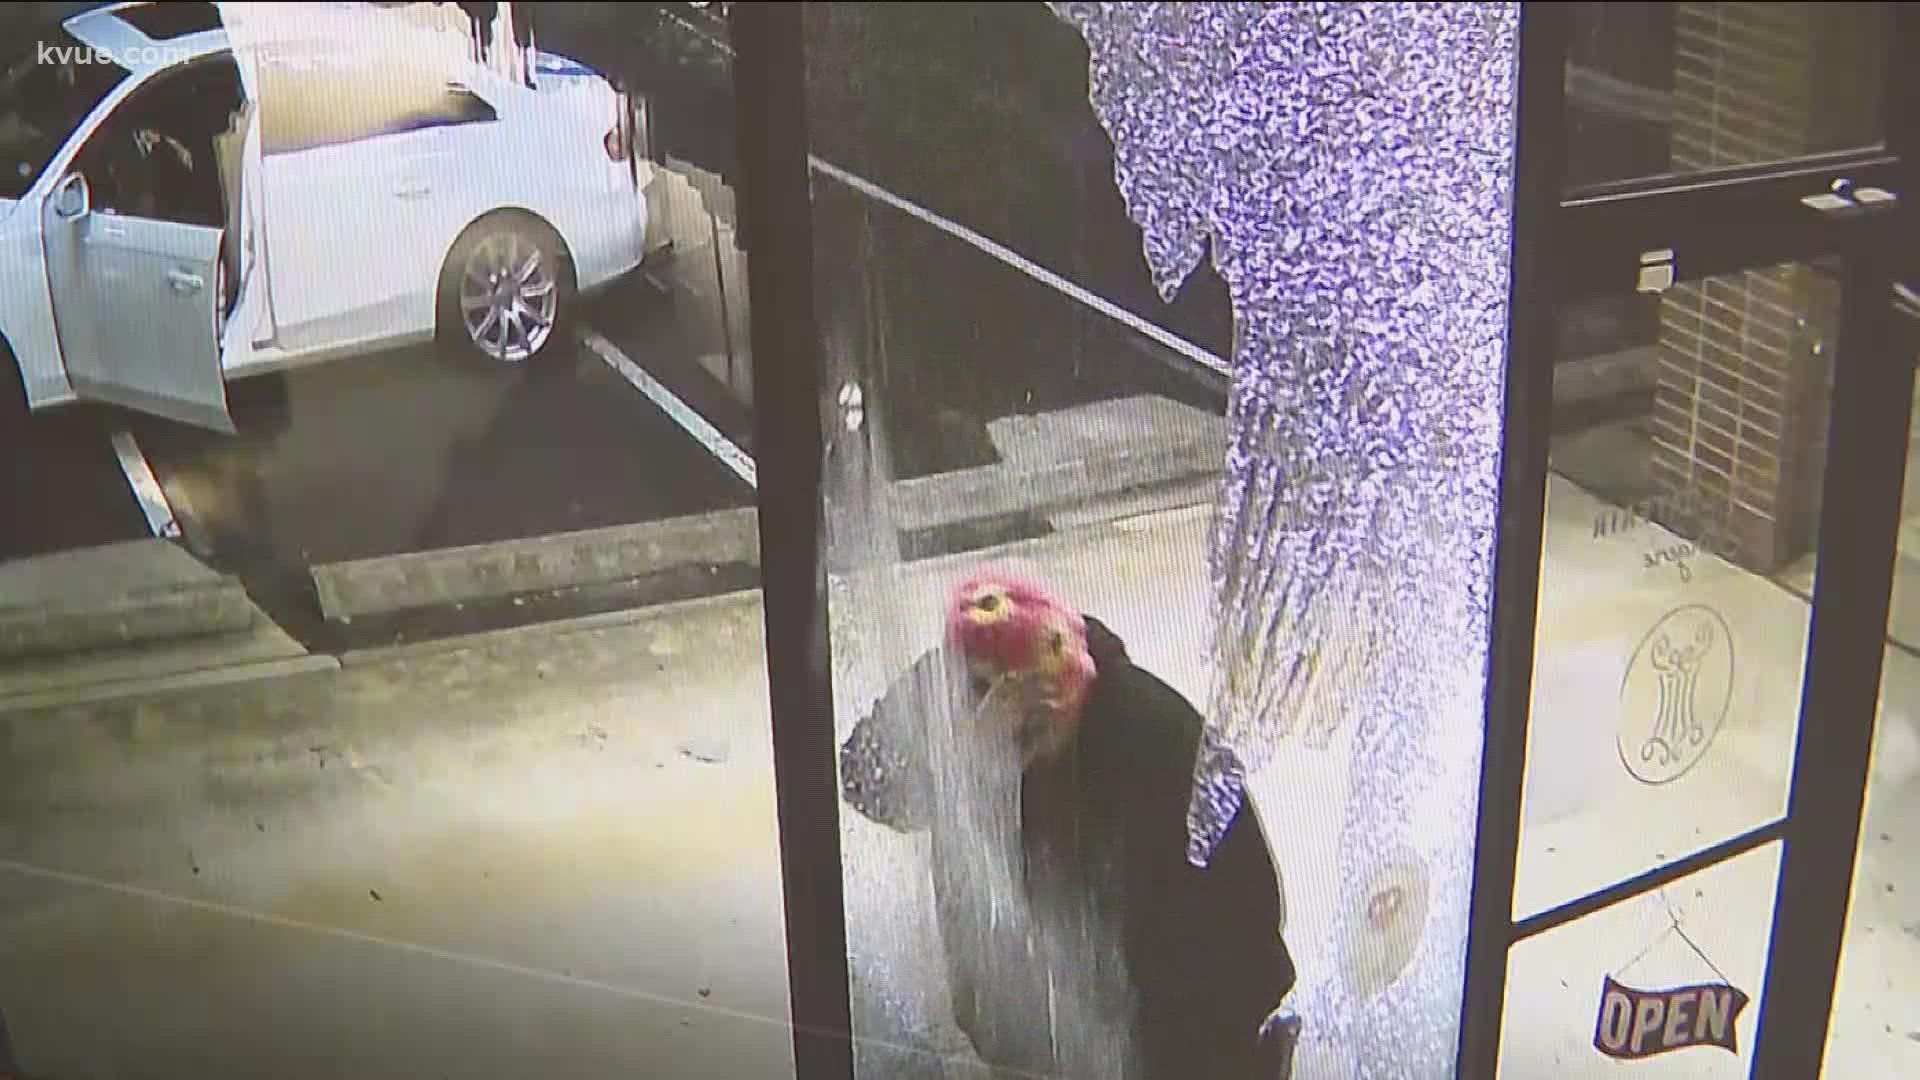 A North Austin business owner told KVUE that a city employee told him to collect his own evidence so police could investigate a burglary at his store.